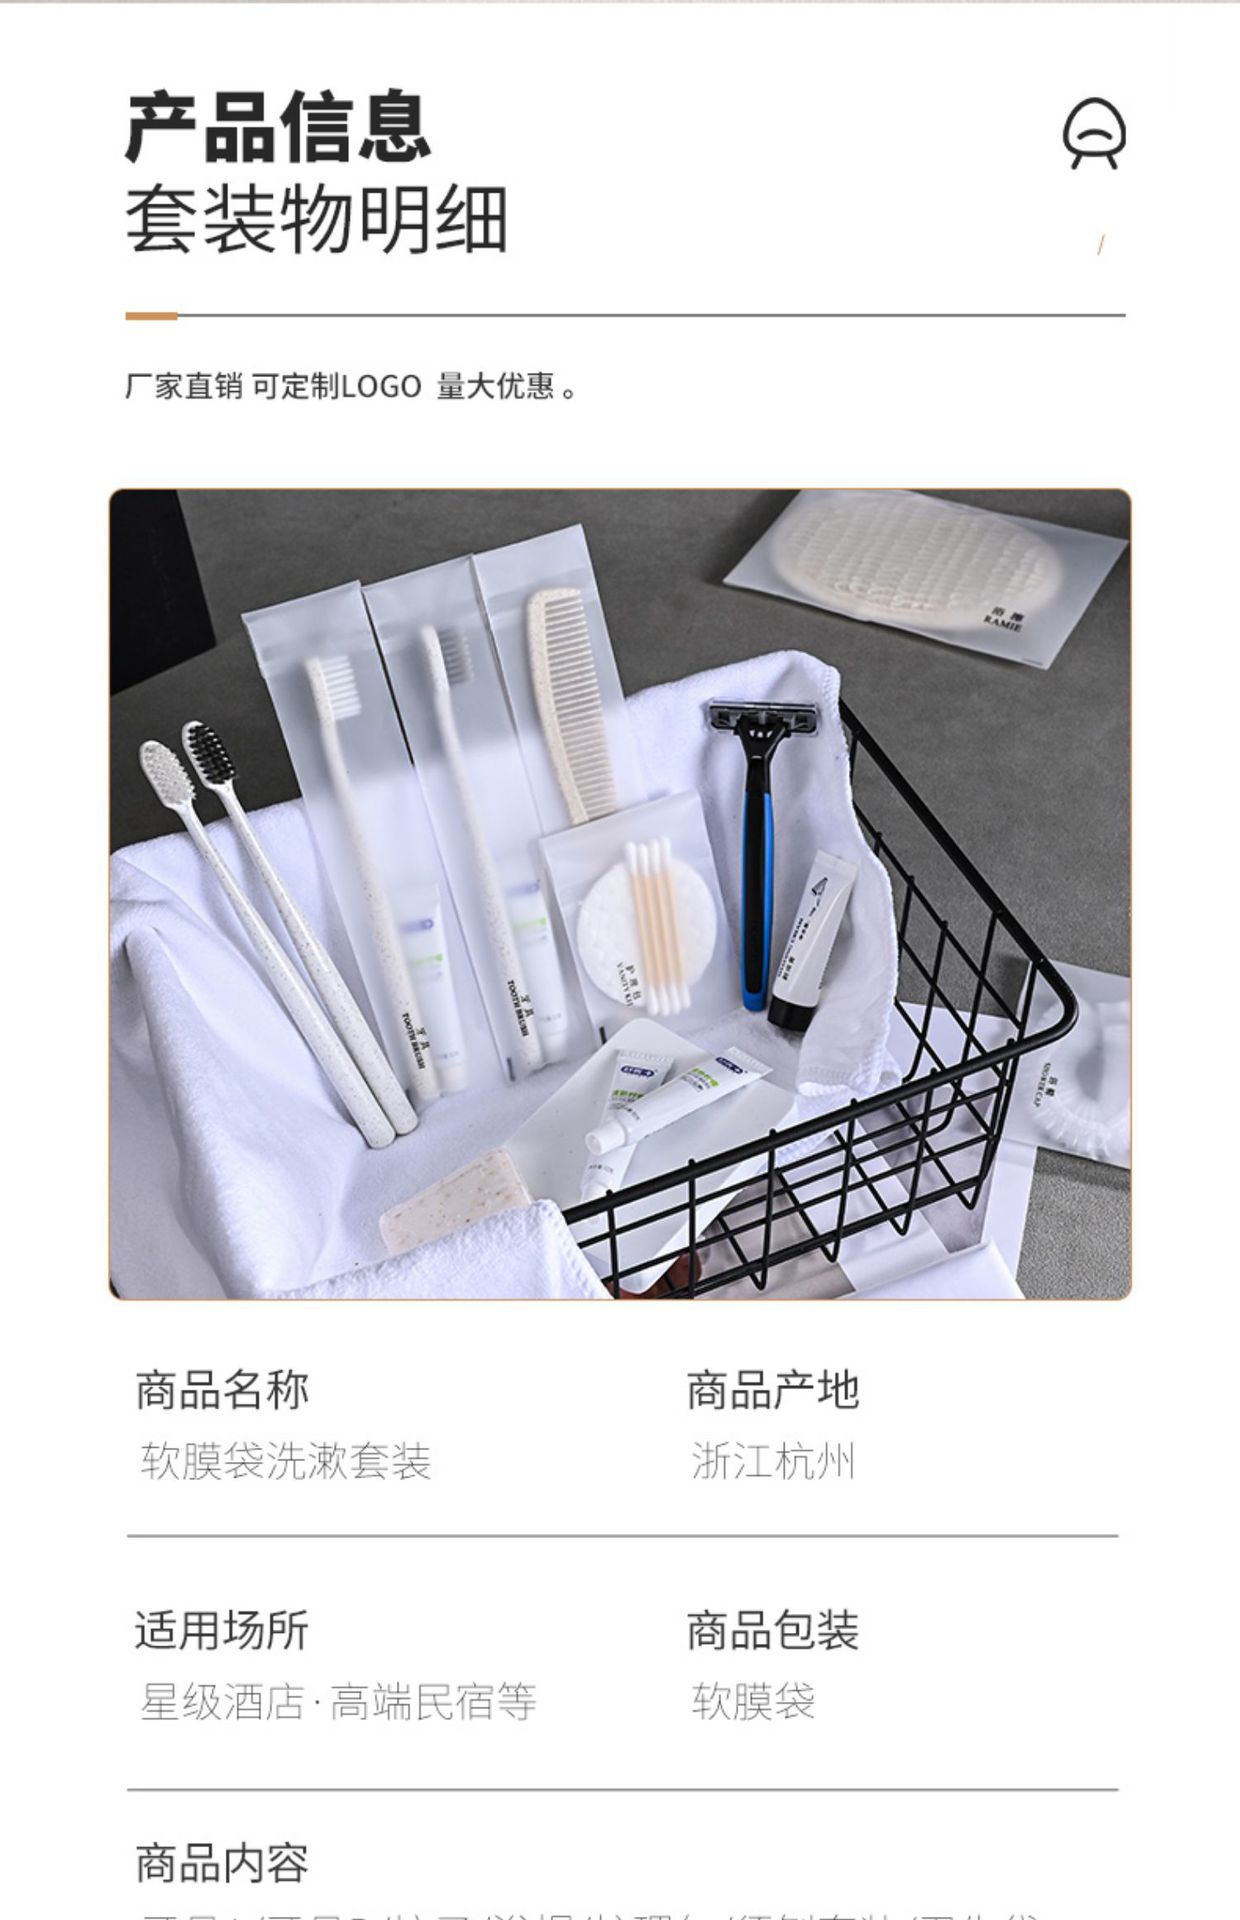 Disposable Hotel Supplies Small Head Soft-Bristle Toothbrush with Toothpaste Soft-Film Bag Washing Set for B & B Hotel